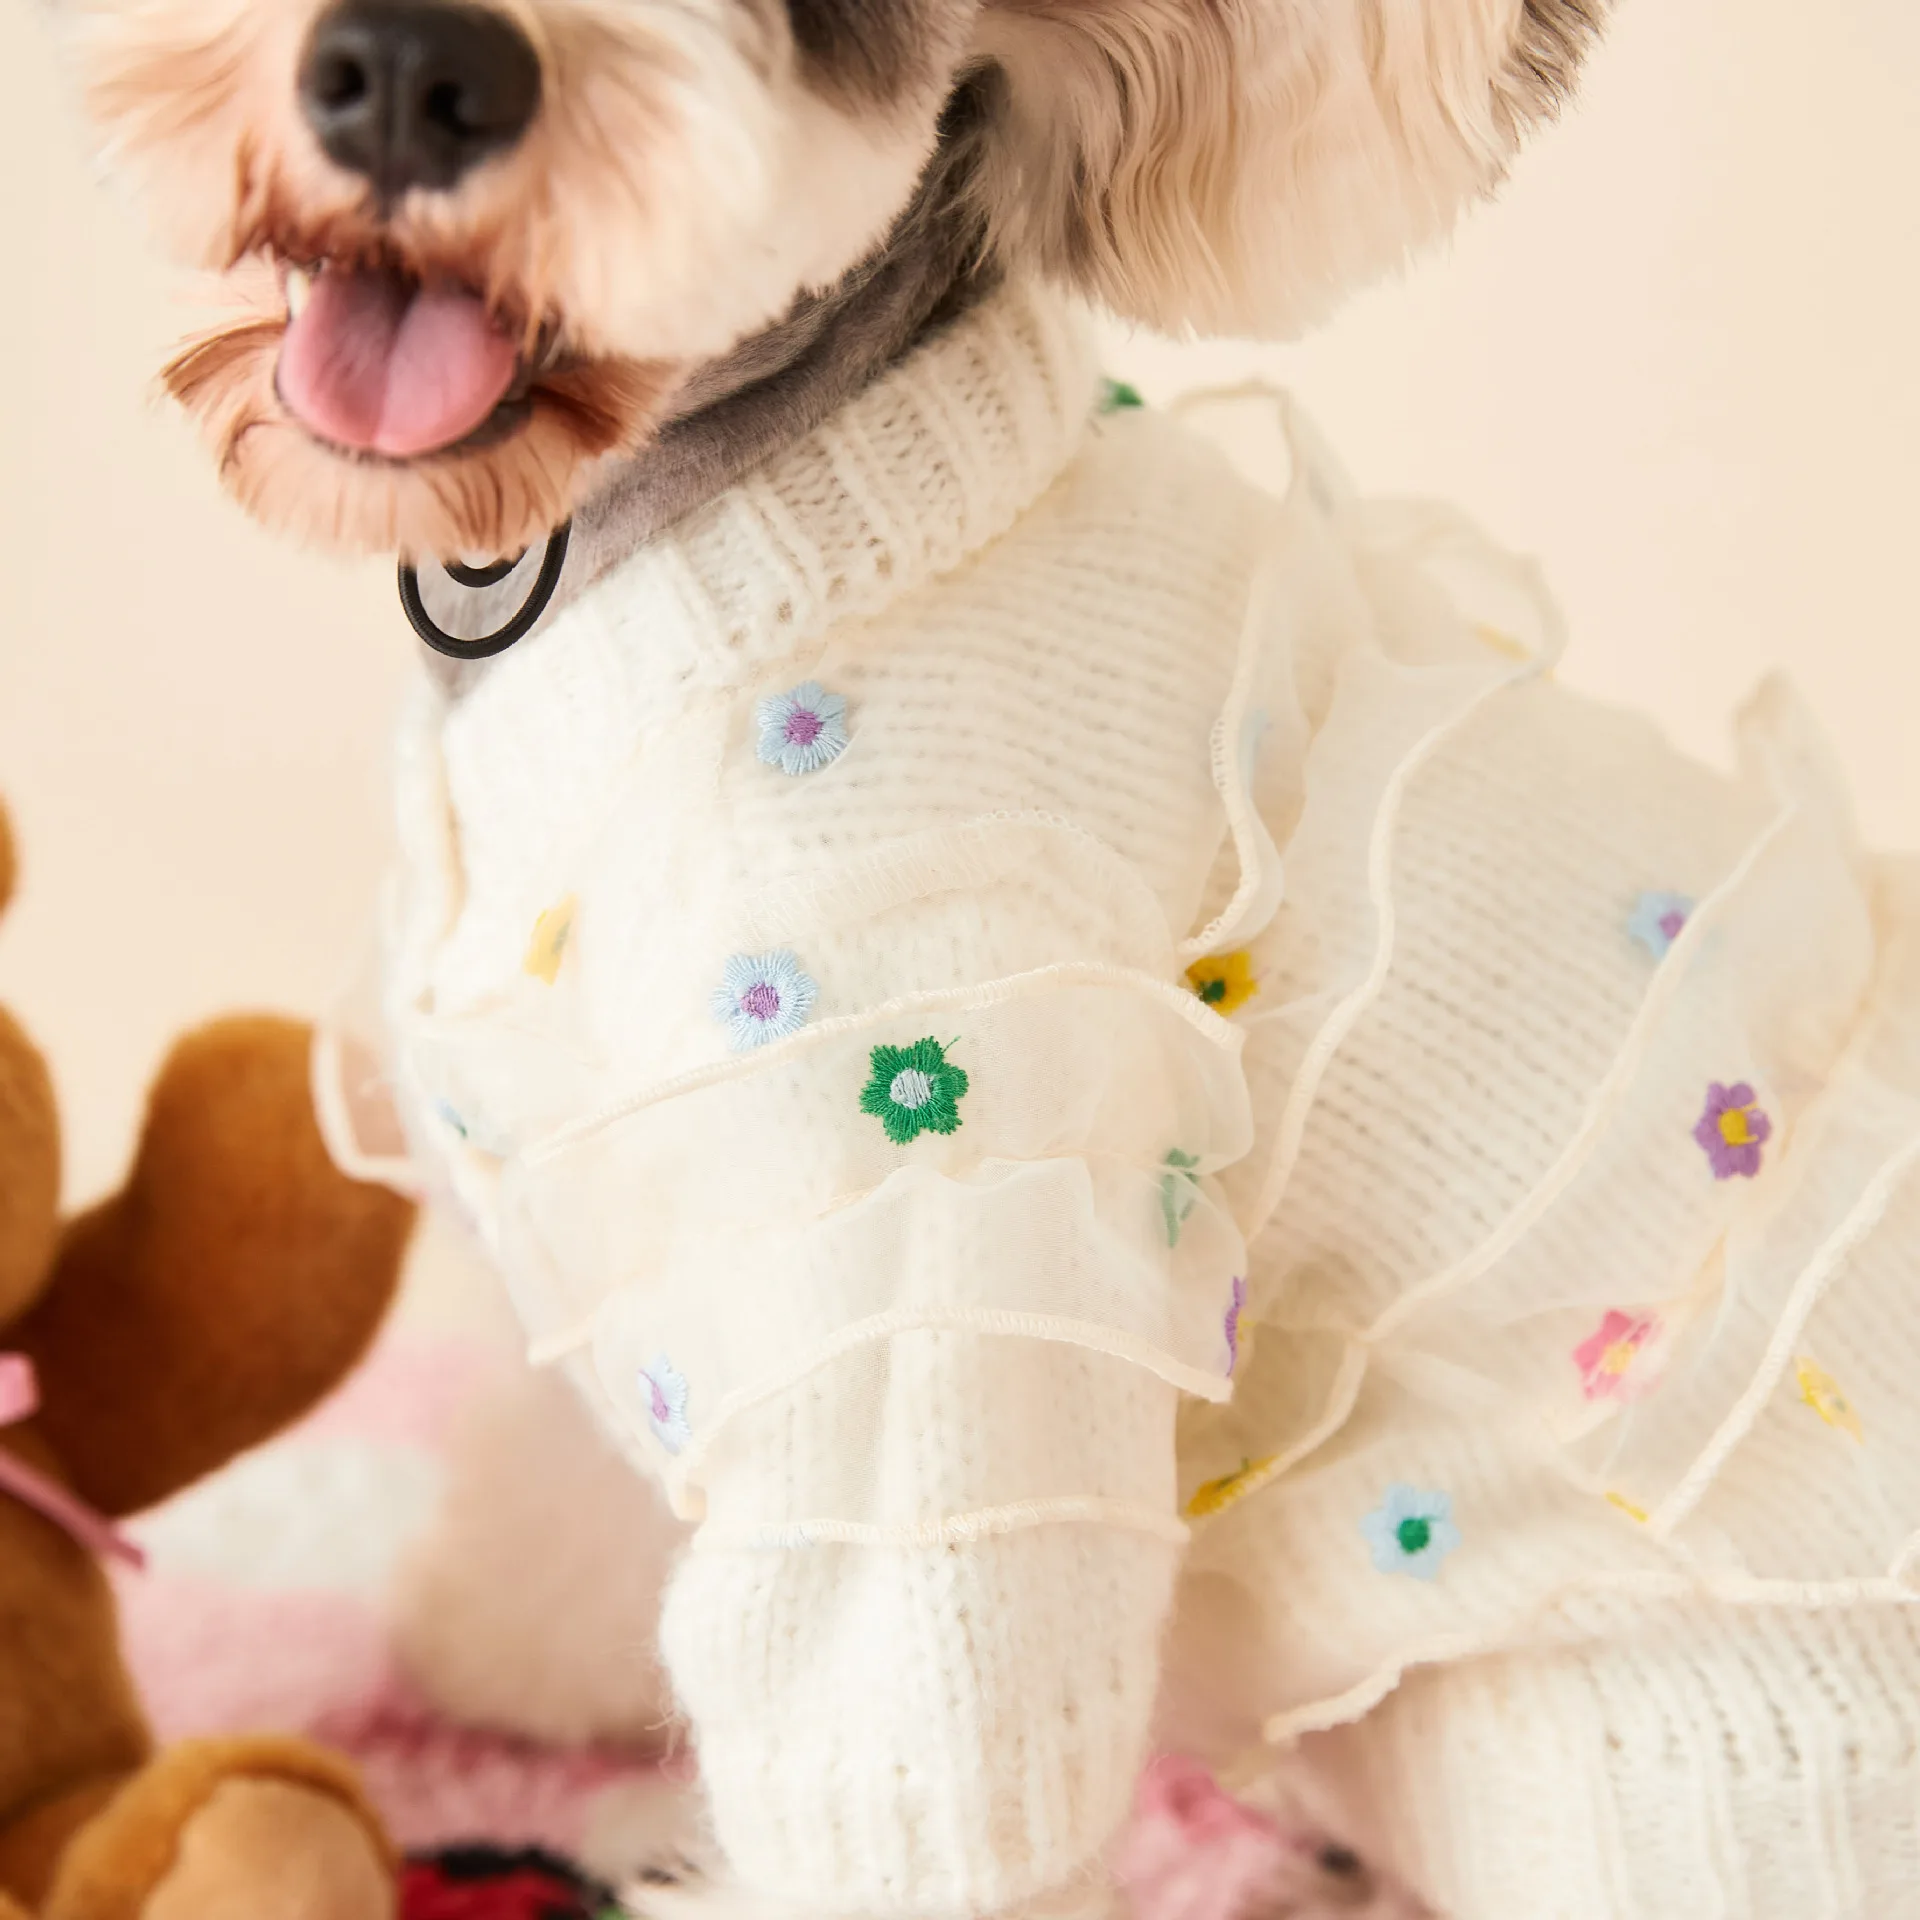 Dog Clothes Korean for Small Dogs Girl Cute Winter Expensive Designer High  Quality Floral Dog Sweaters for Pets Chihuahua